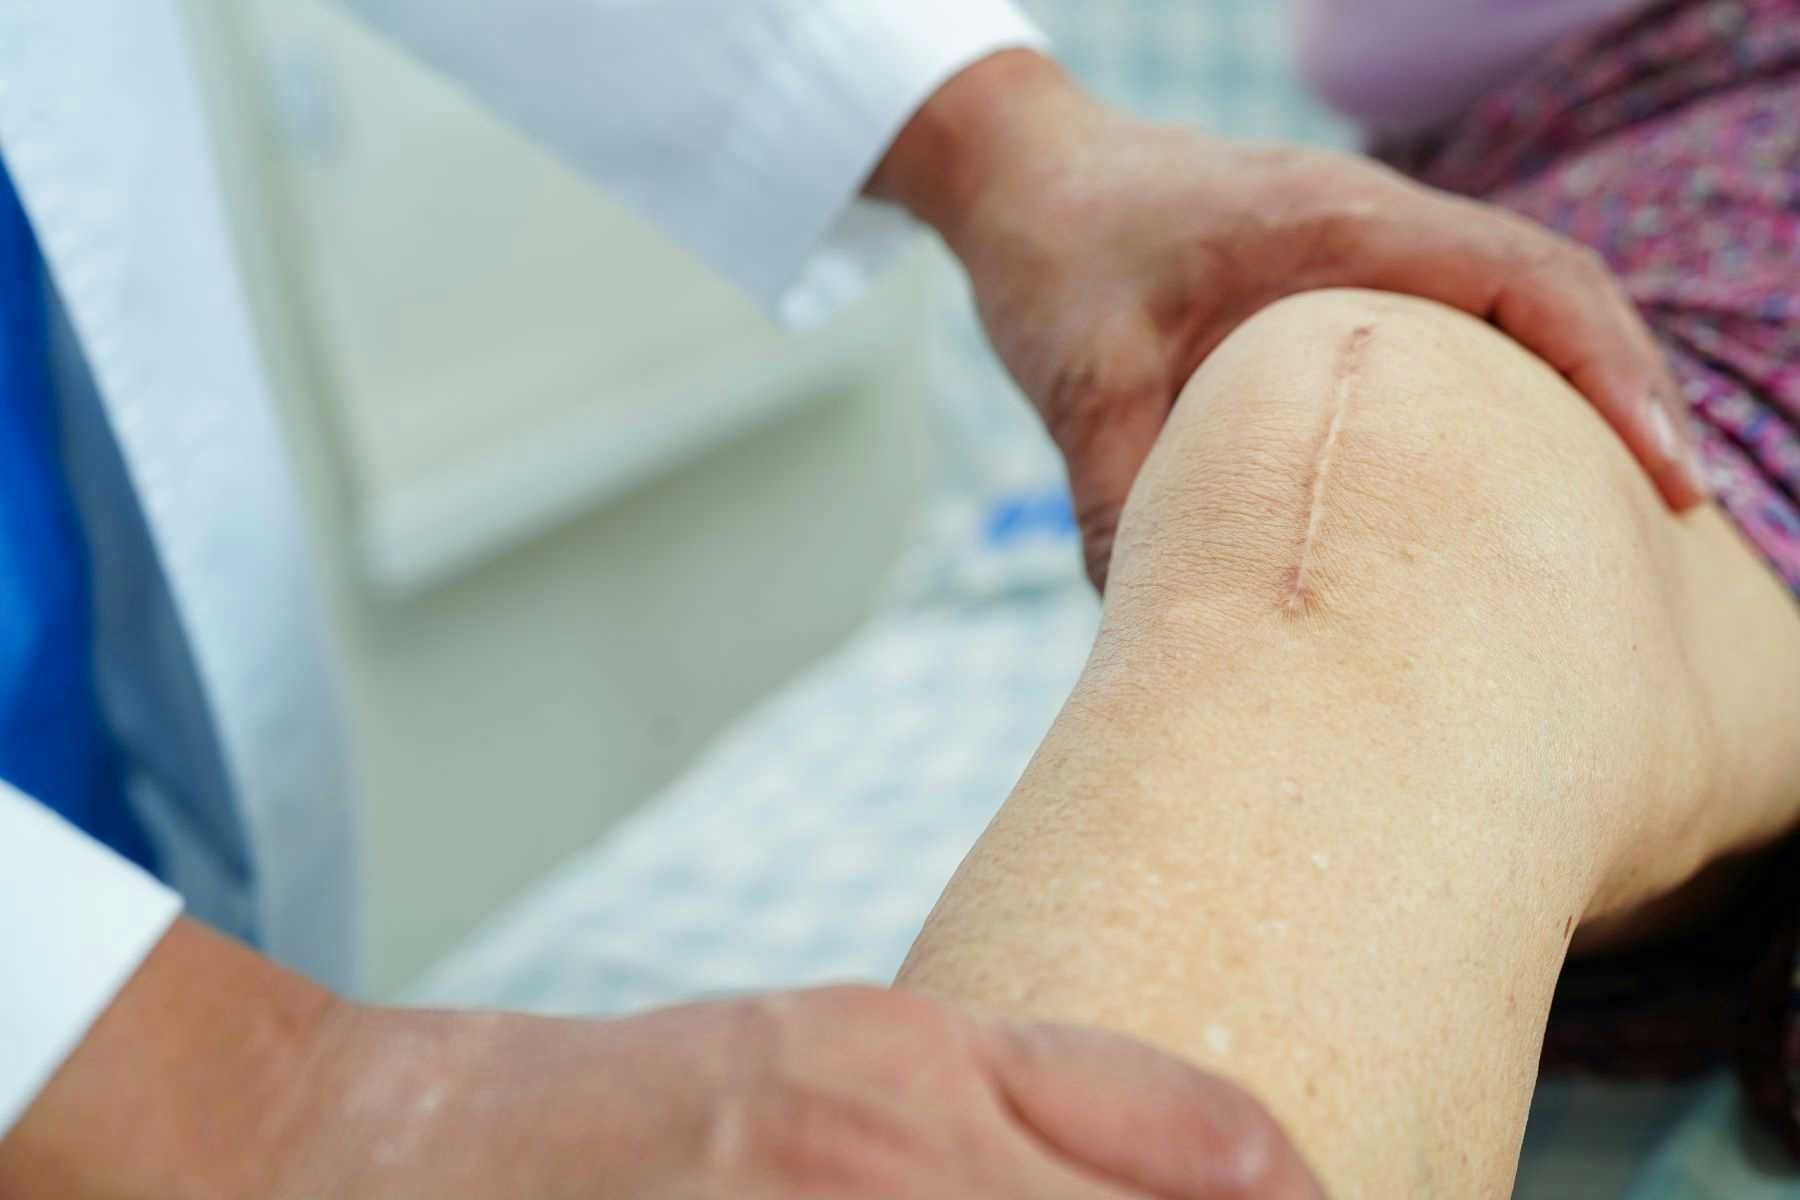 Doctor evaluating patient's knee with surgery scar